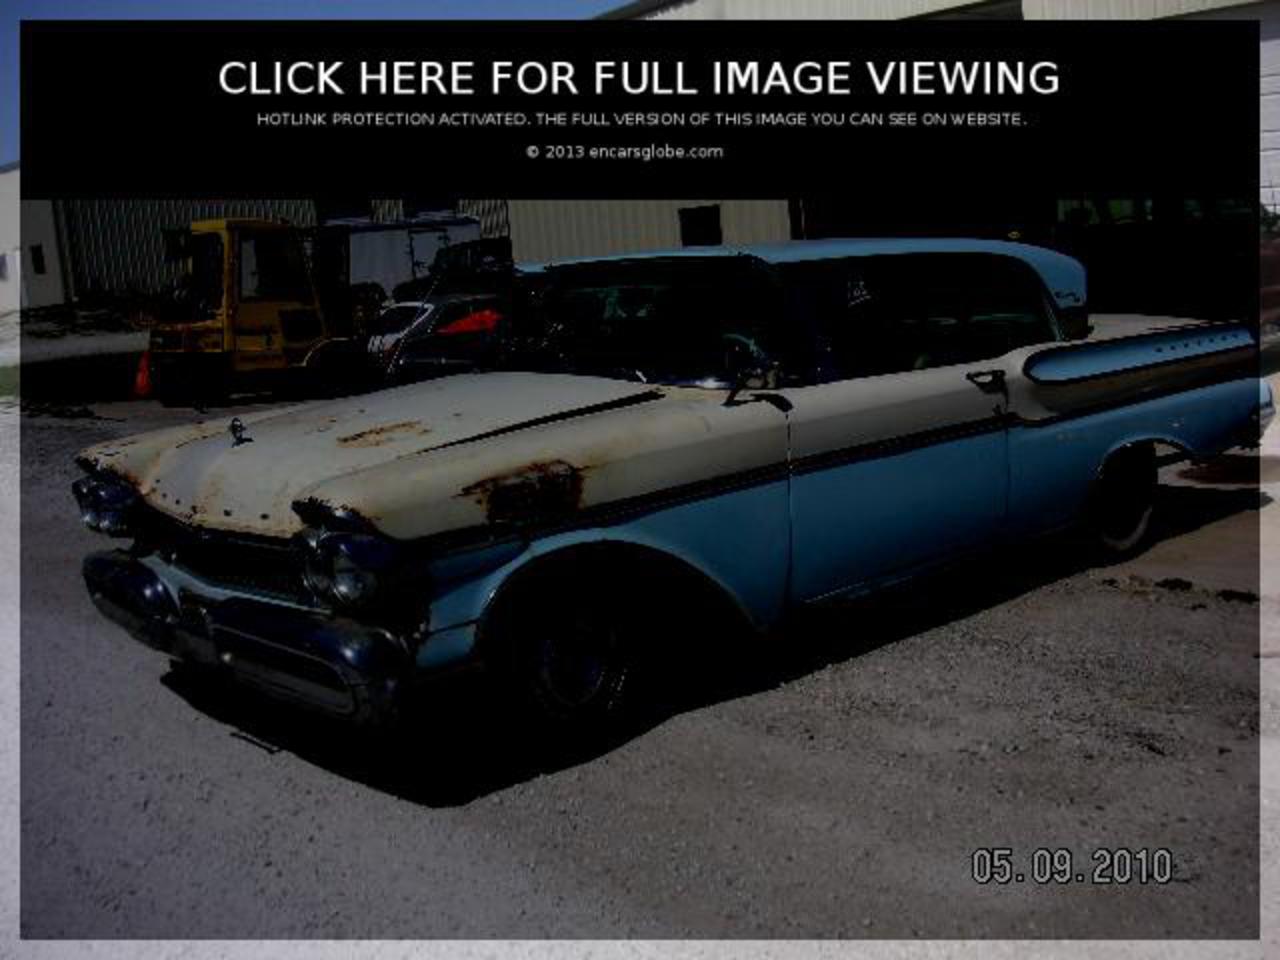 Edsel Pacer 2dr HT Photo Gallery: Photo #08 out of 9, Image Size ...